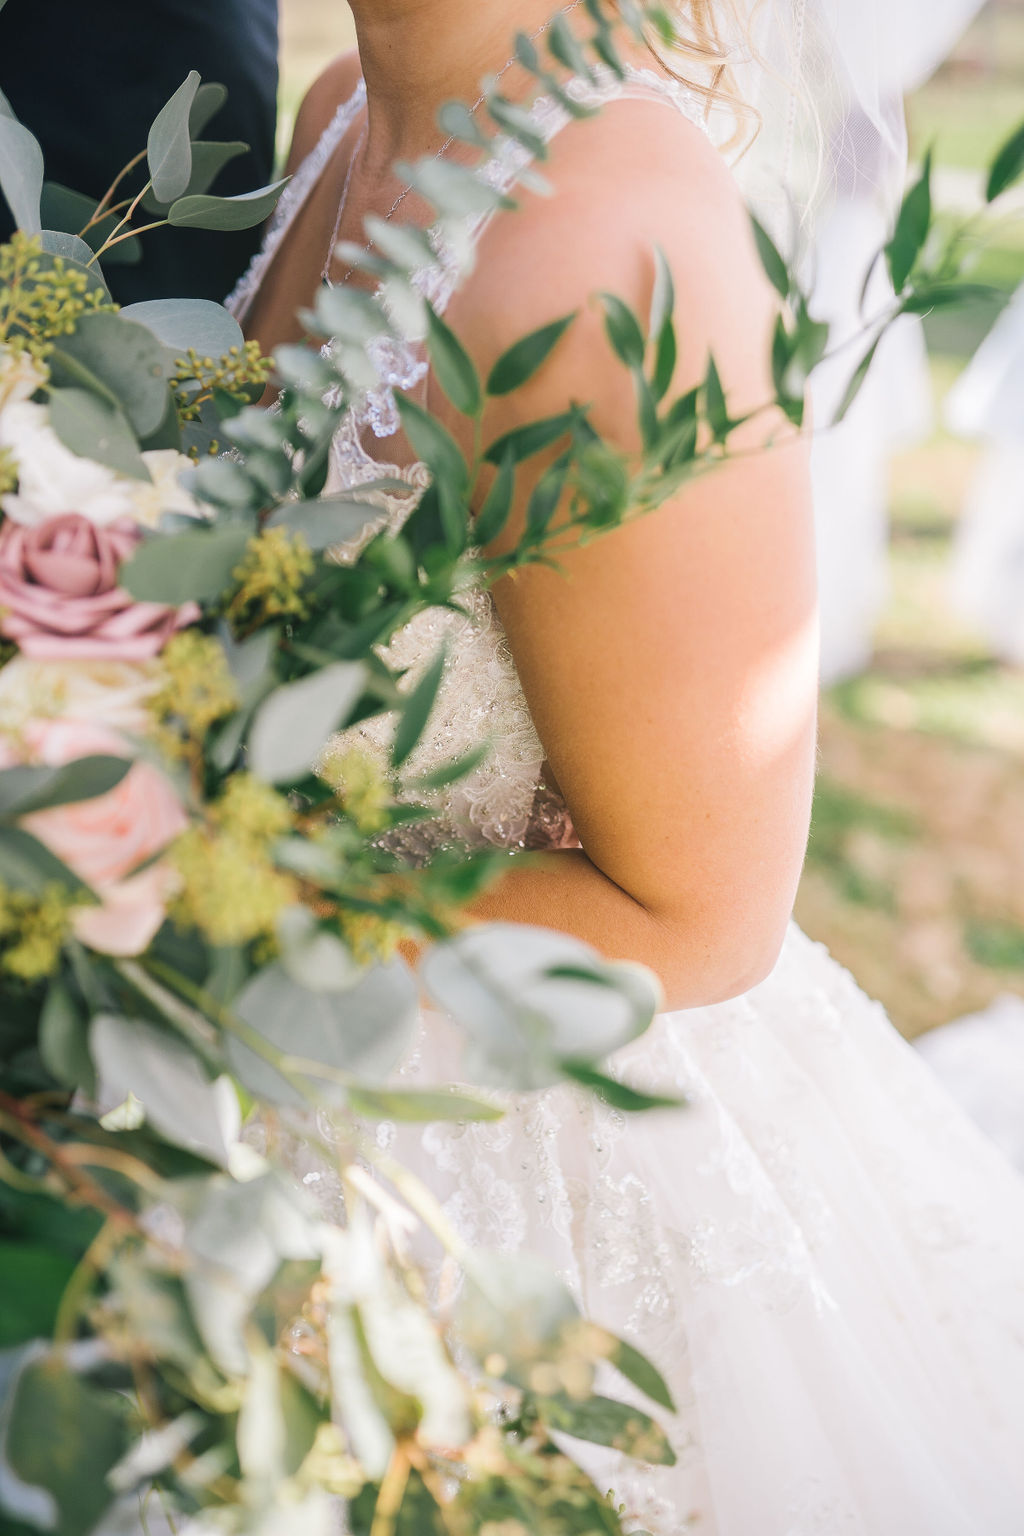 bride holding flowers on wedding day captured in detail shots